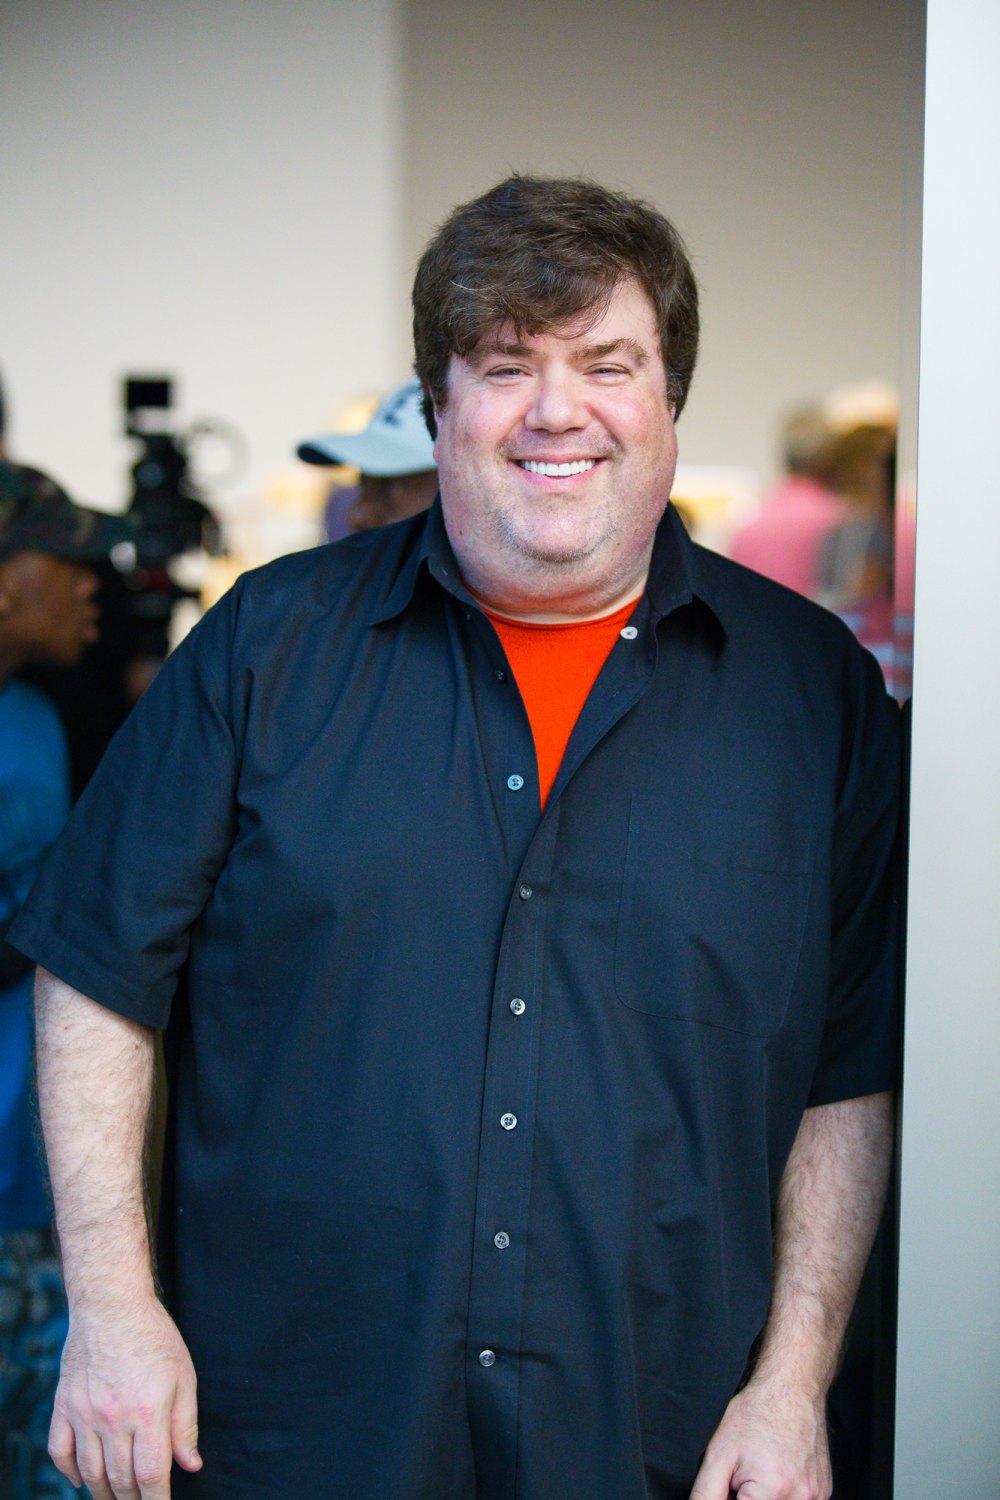 Dan Schneider Controversial Nickelodeon Reign Is the Focus of Upcoming Doc